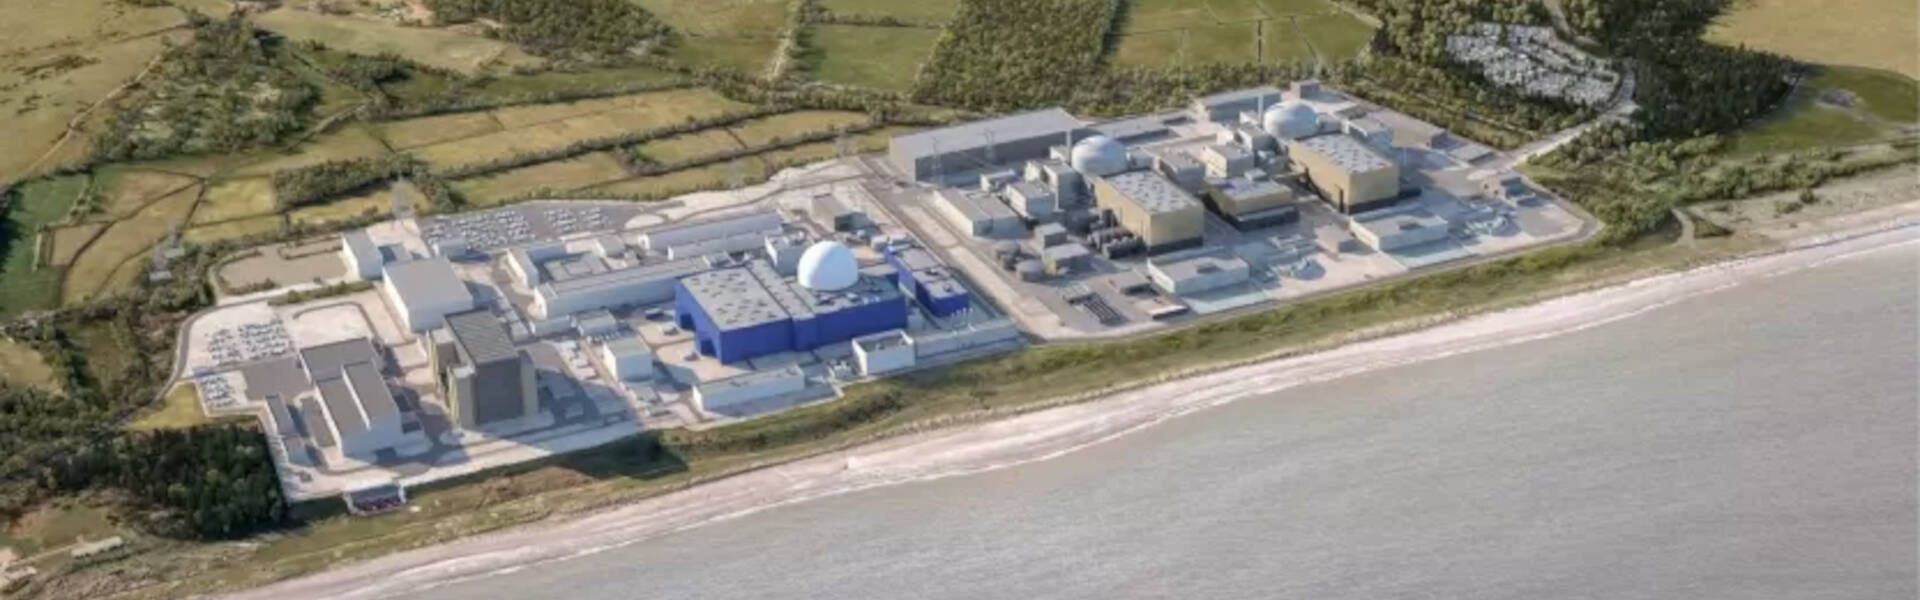 Cost concerns raised as nuclear plan revealed